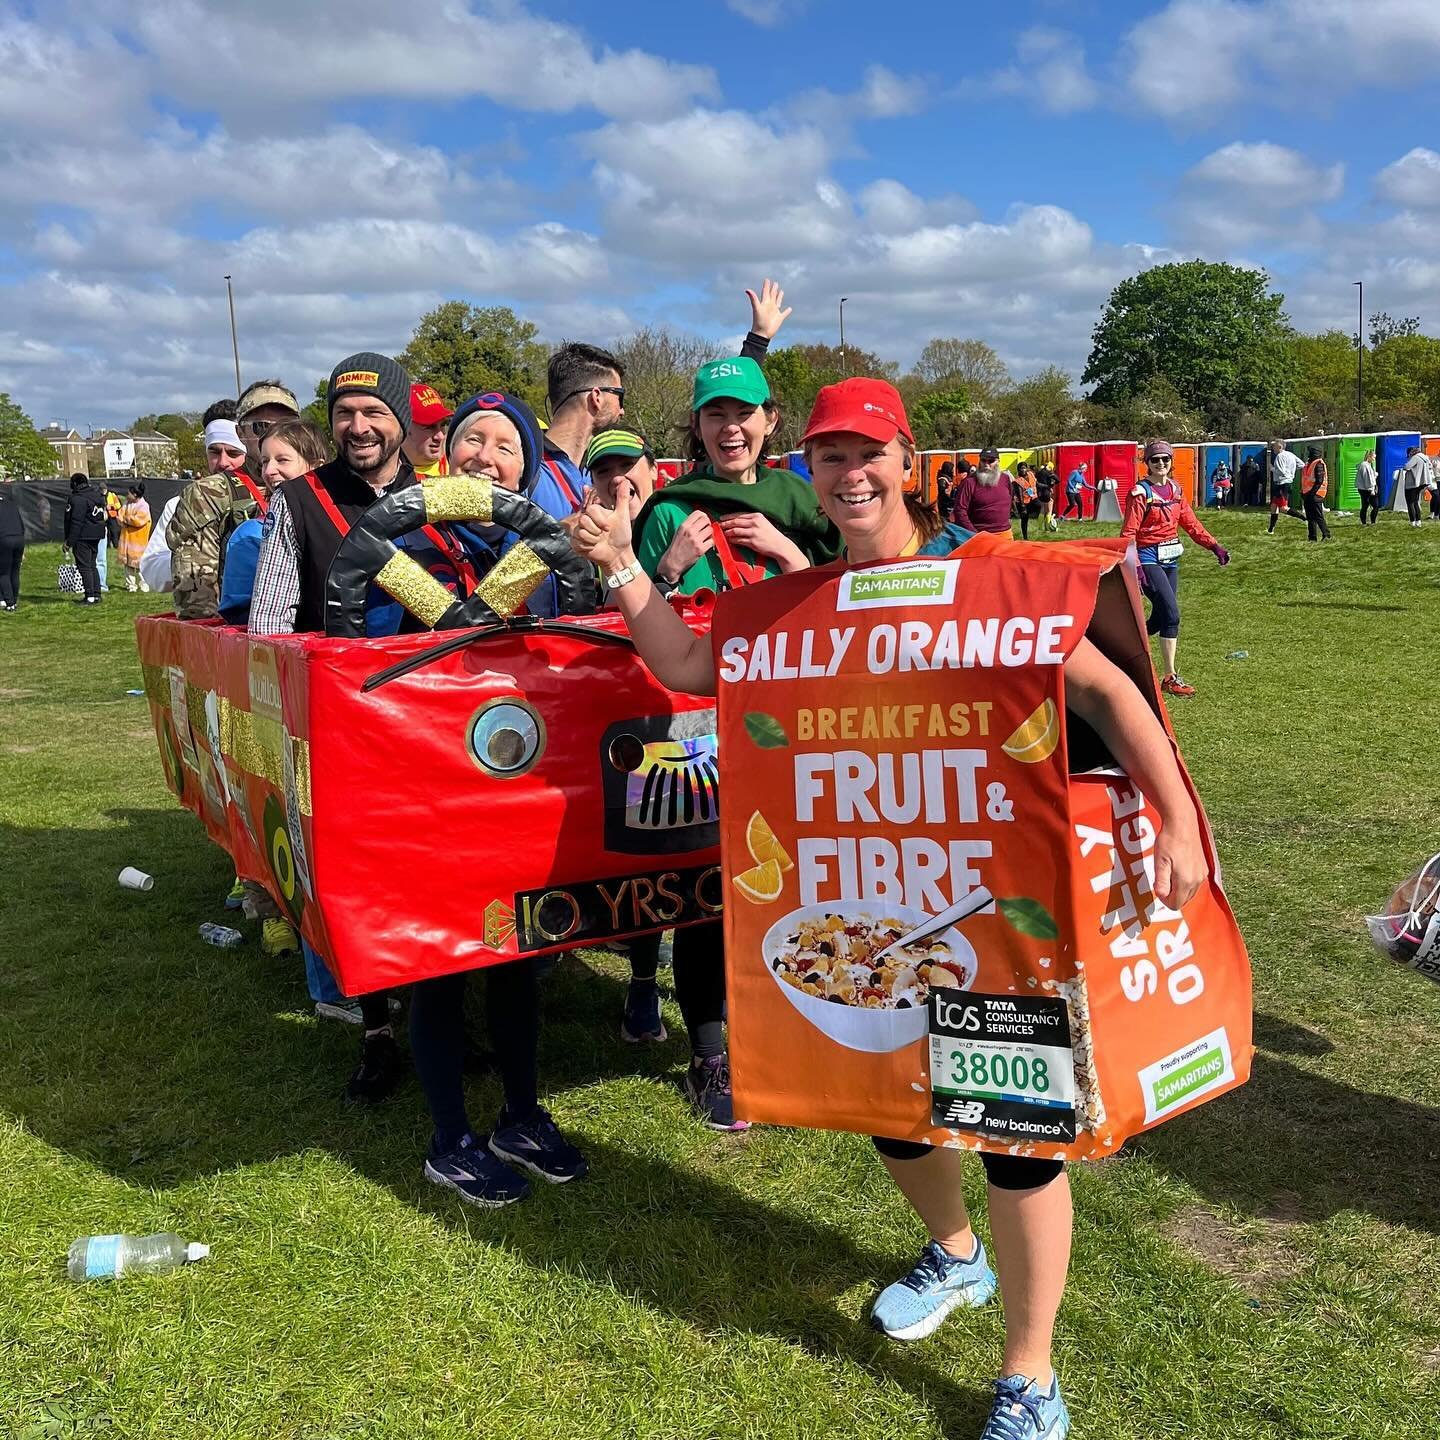 Congratulations to everyone that ran the @londonmarathon this weekend - what an incredible achievement of which we are in awe. 

You won&rsquo;t believe who bumped into each other! It was only #TeamMintridge&rsquo;s @sallyorangembe &amp; our trustee,